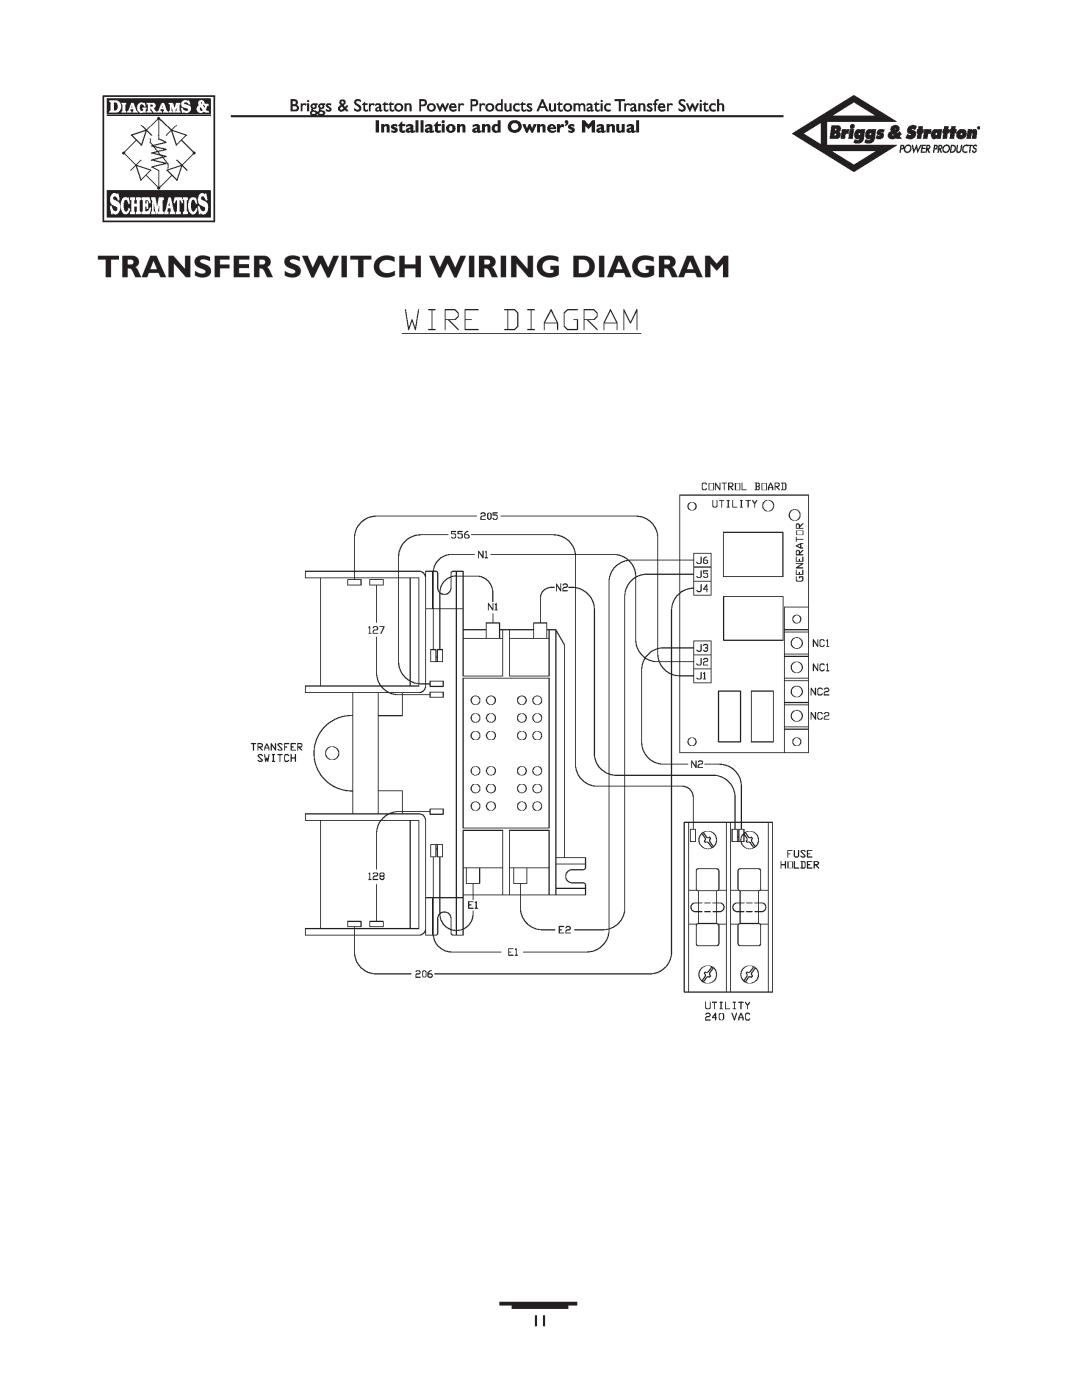 Briggs & Stratton 01813-0, 01814-0 owner manual Transfer Switch Wiring Diagram, Installation and Owner’s Manual 